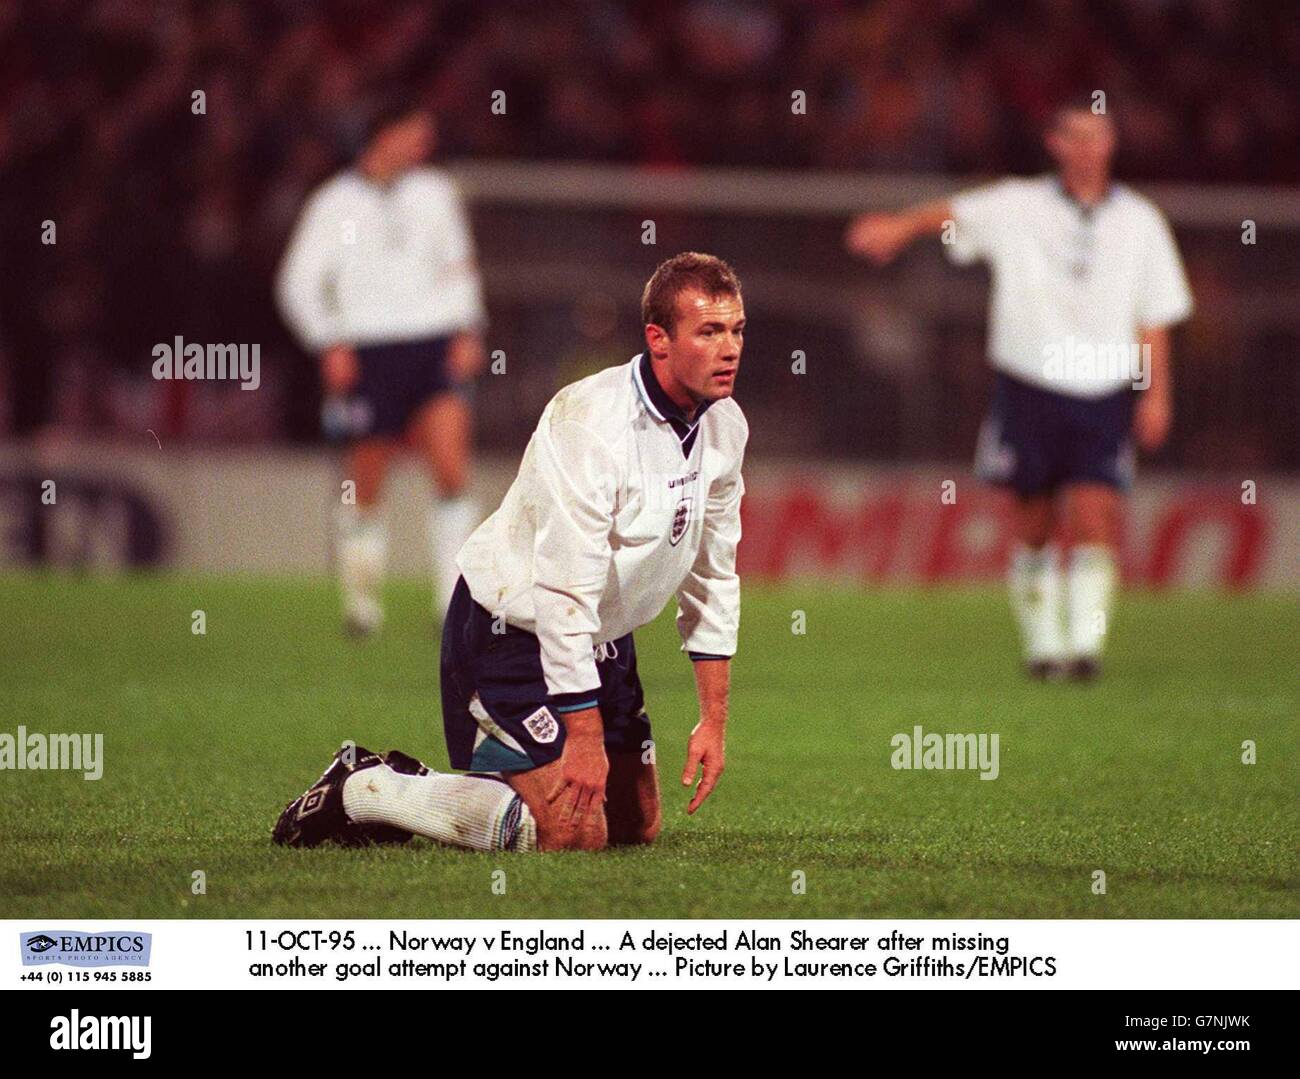 11-OCT-95 ... Norway v England ... A dejected Alan Shearer after missing another goal attempt against Norway ... Picture by Laurence Griffiths/EMPICS Stock Photo